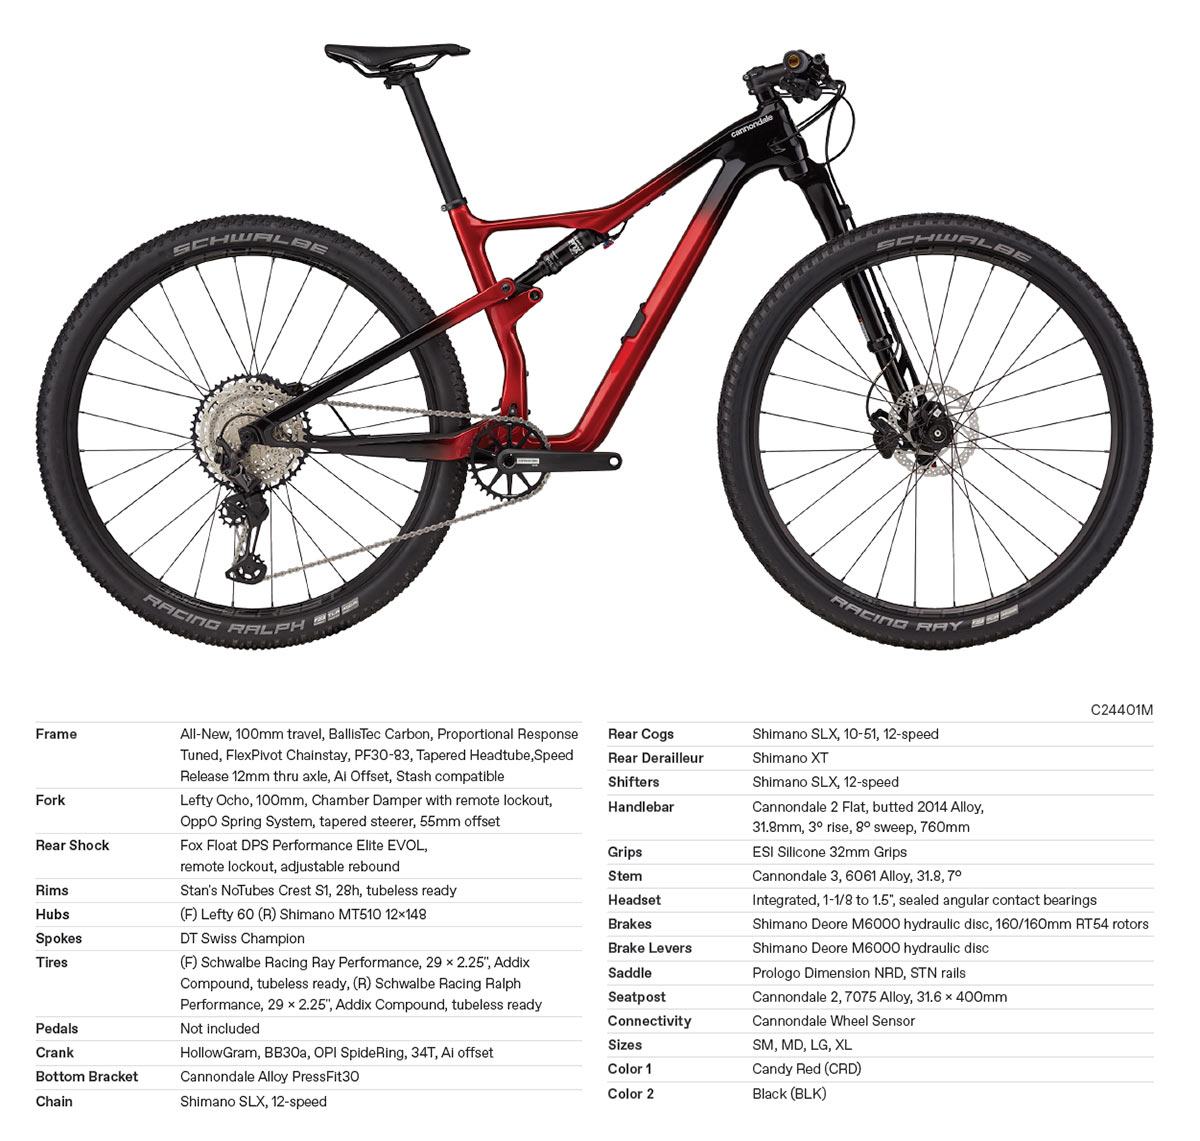 2021 Cannondale Scalpel Carbon 3 mountain bike specs and build components